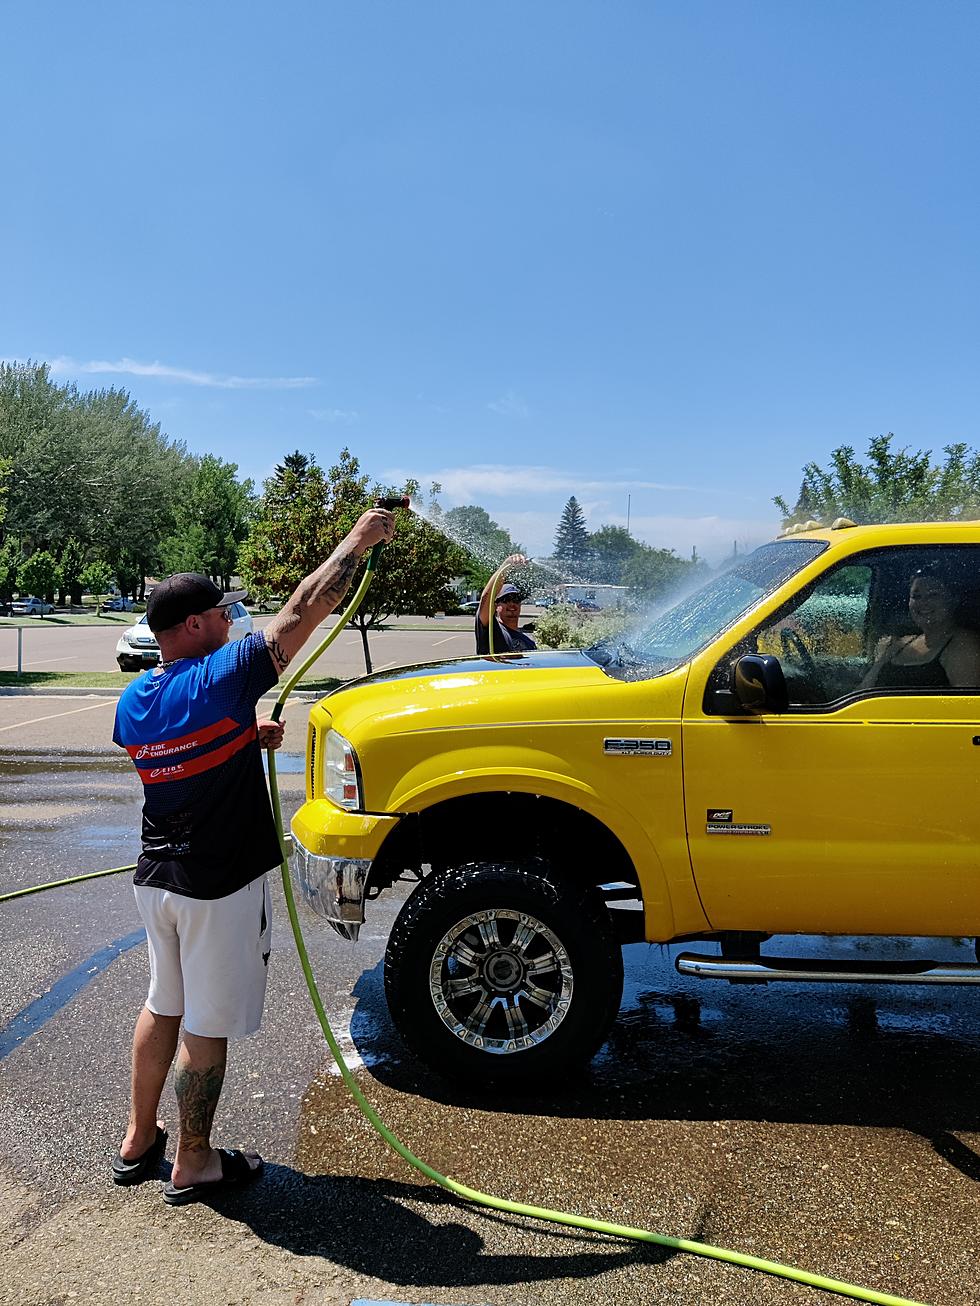 “Clark’s Car Wash” – EIDE Will Double Match Donations